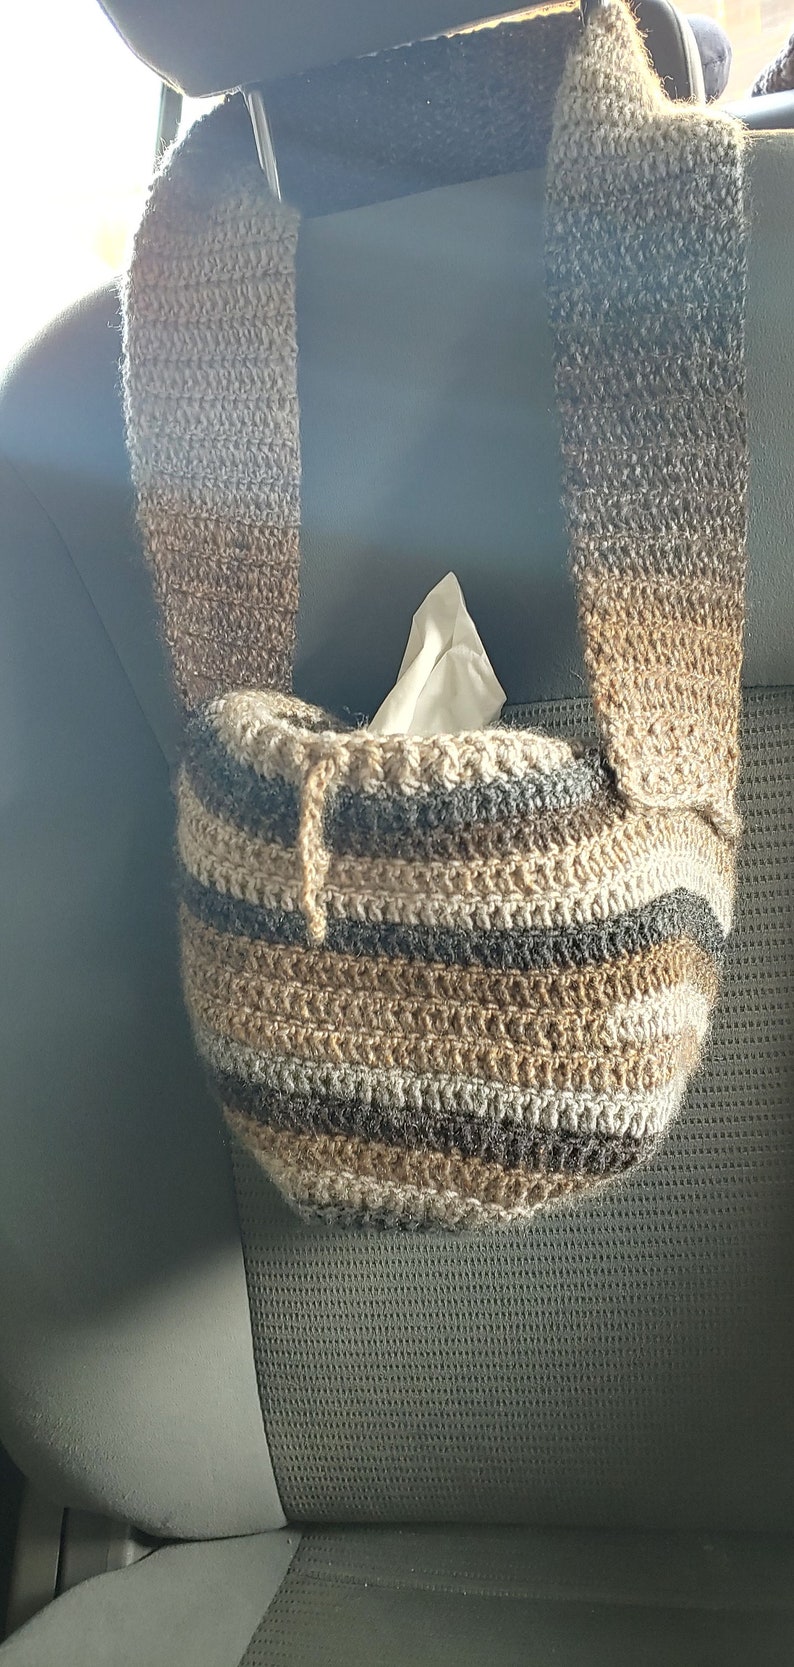 Hanging from a car headrest is a crocheted bag in shades of brown with a drawstring. Inside the bag is a small square tissue box.